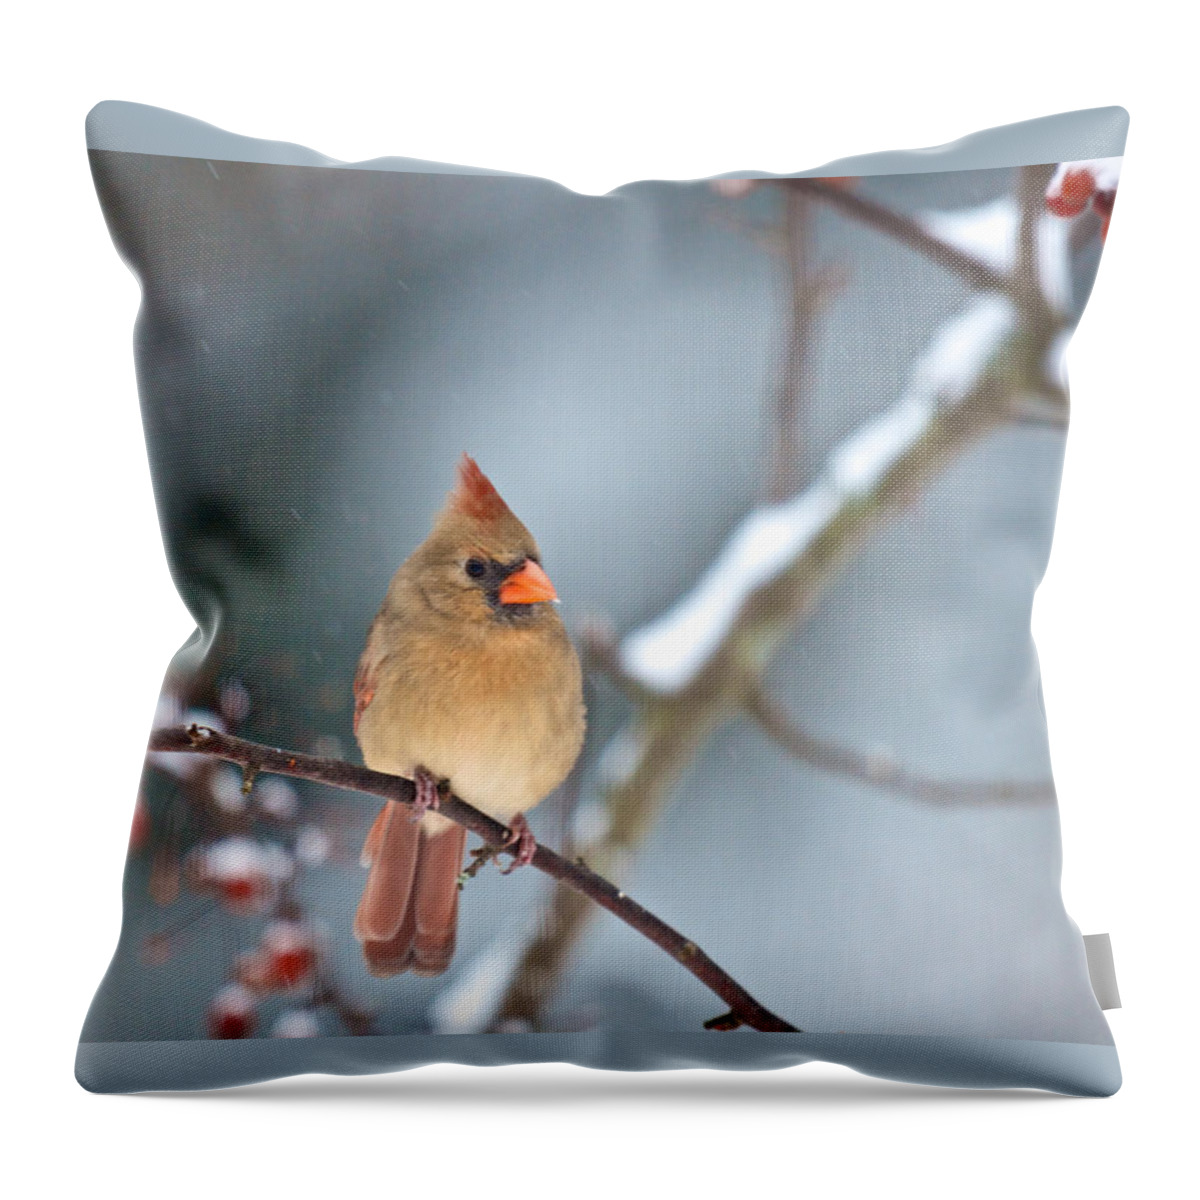 Birds Throw Pillow featuring the photograph Female Cardinal on Cherry Tree in Snow by Kristin Hatt